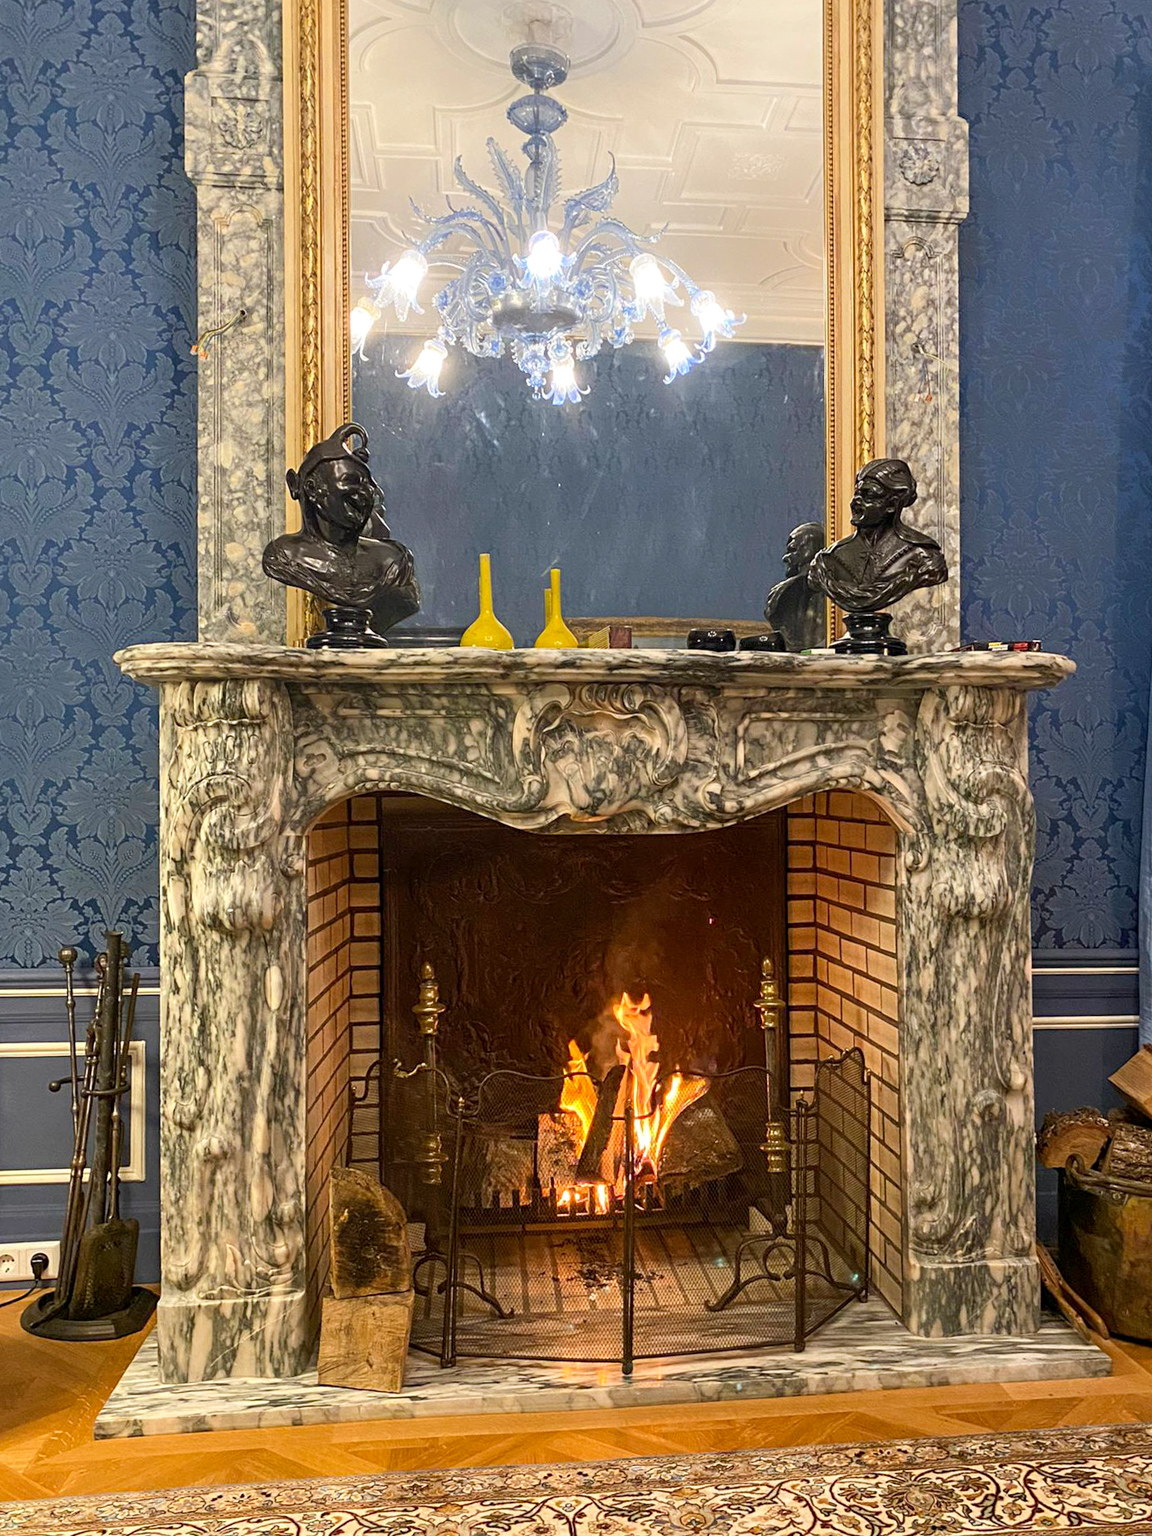 Fireplace in The Hague